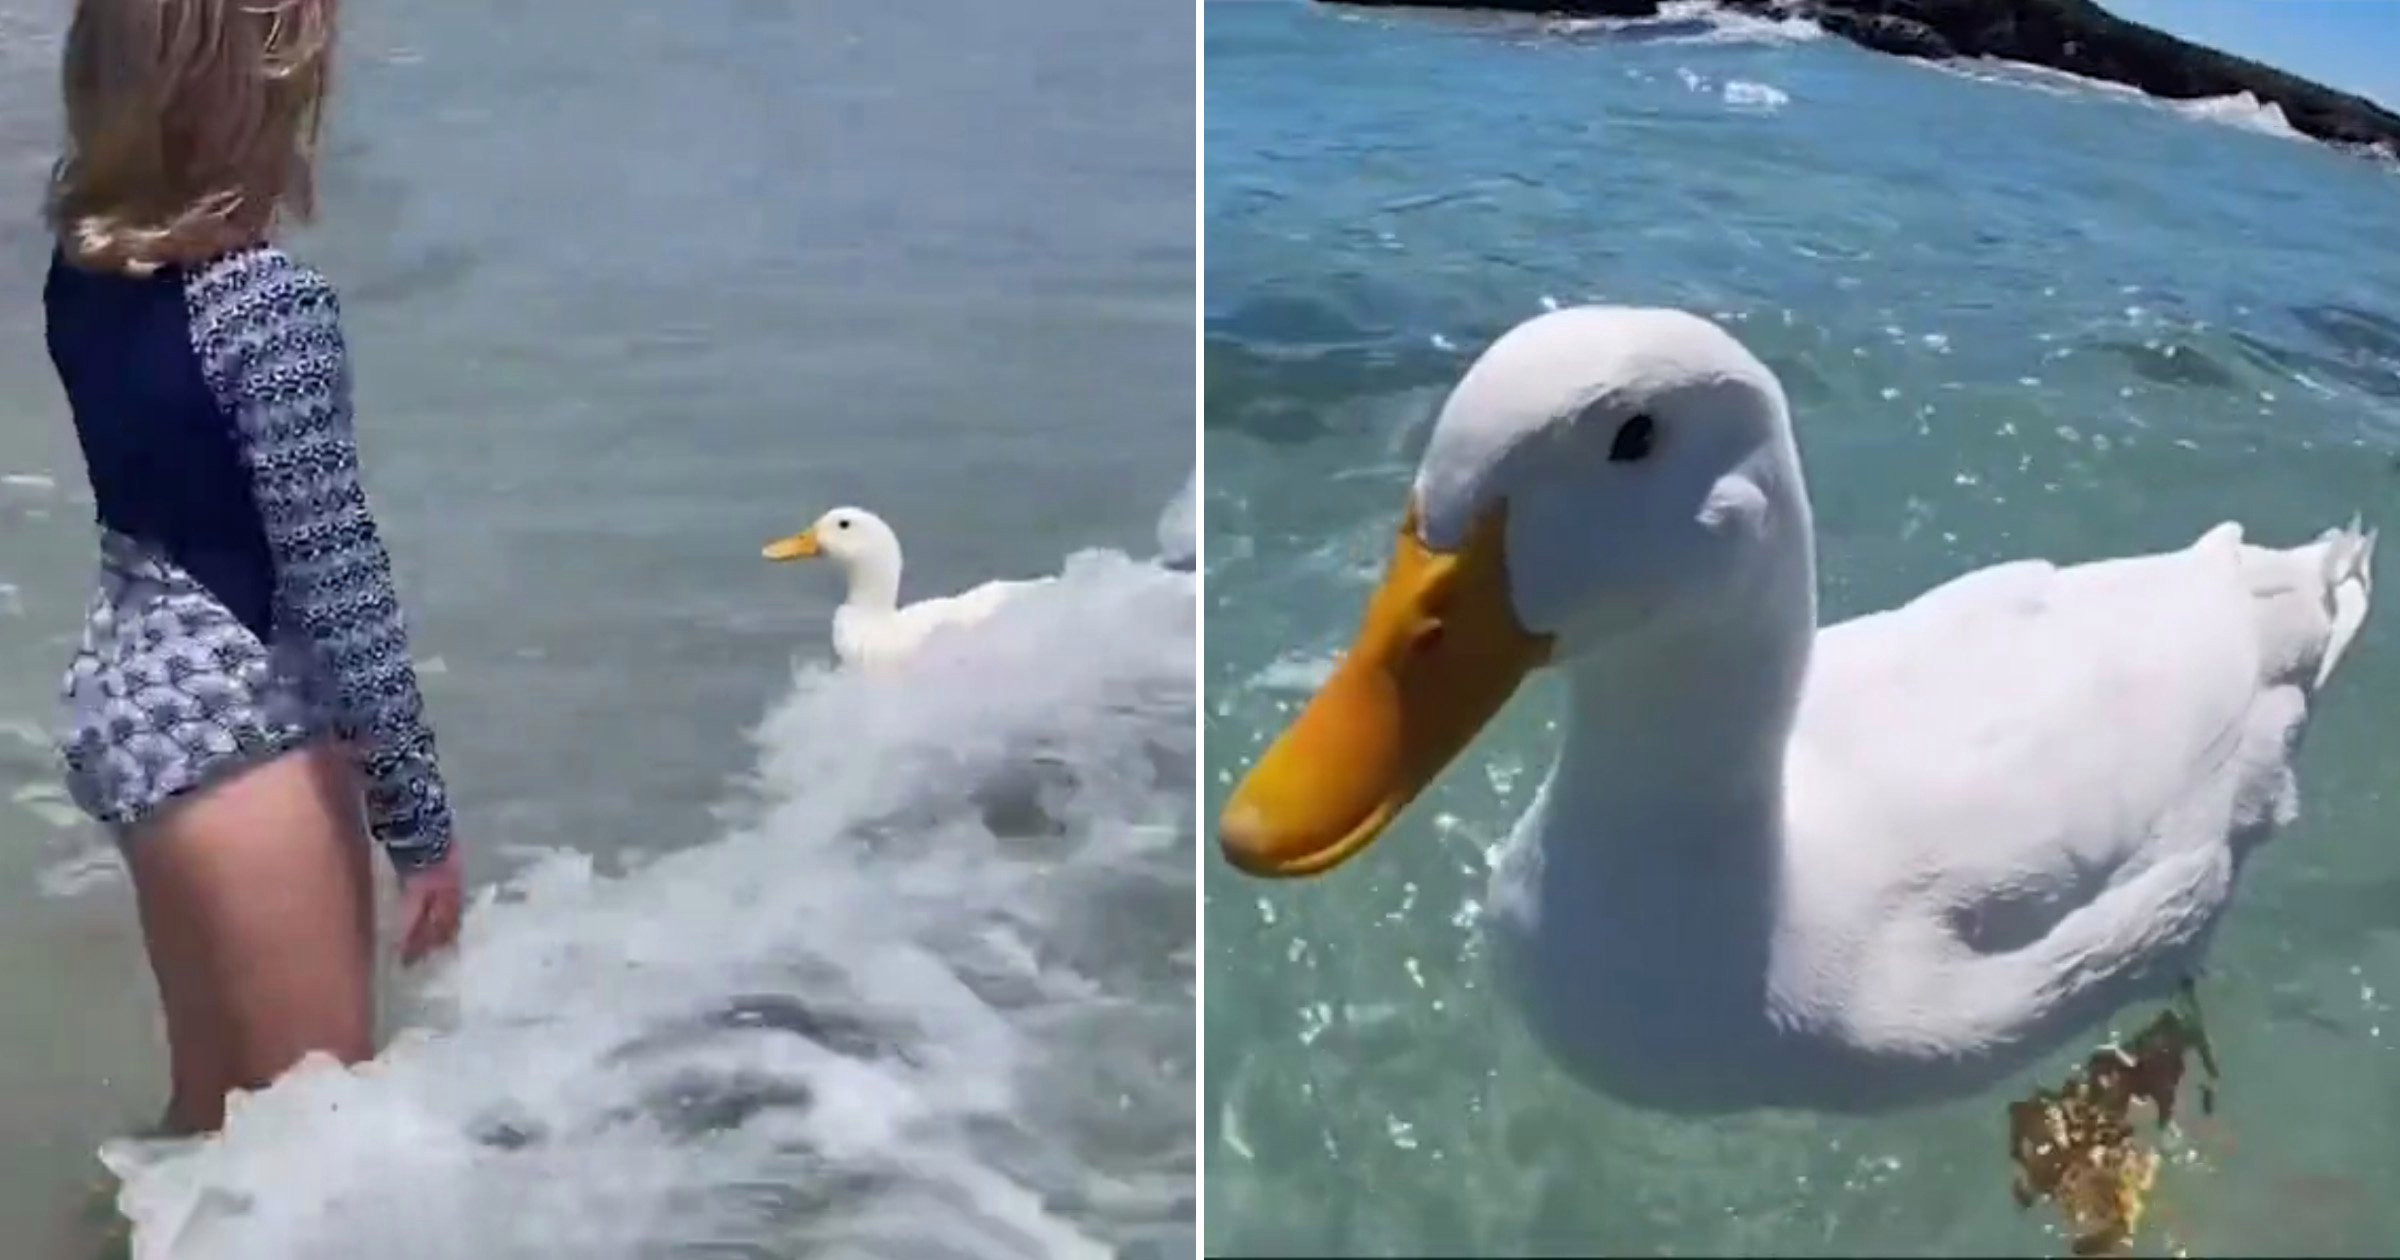 Surfing duck named Duck becomes local celebrity